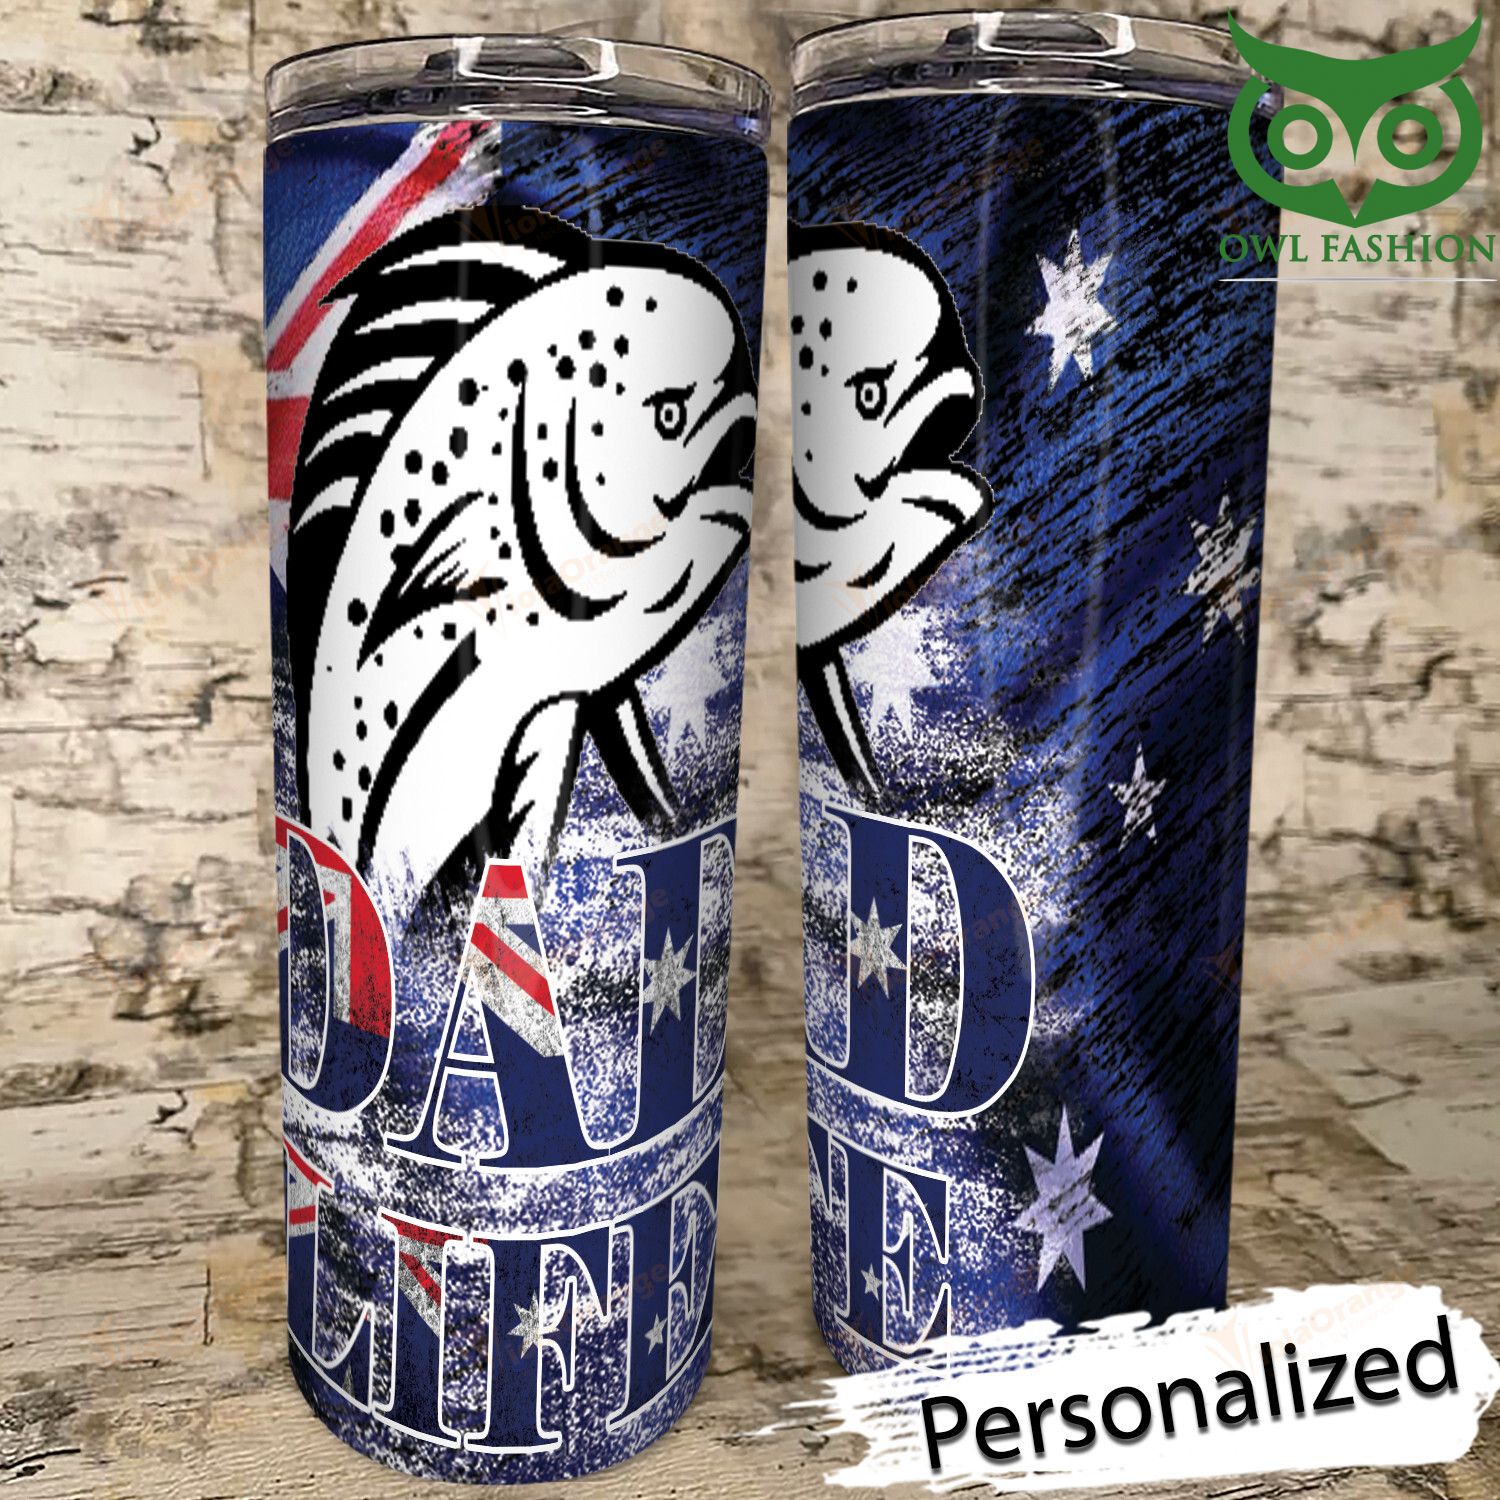 61 Aus Fishing customized skinny tumbler cup special edition